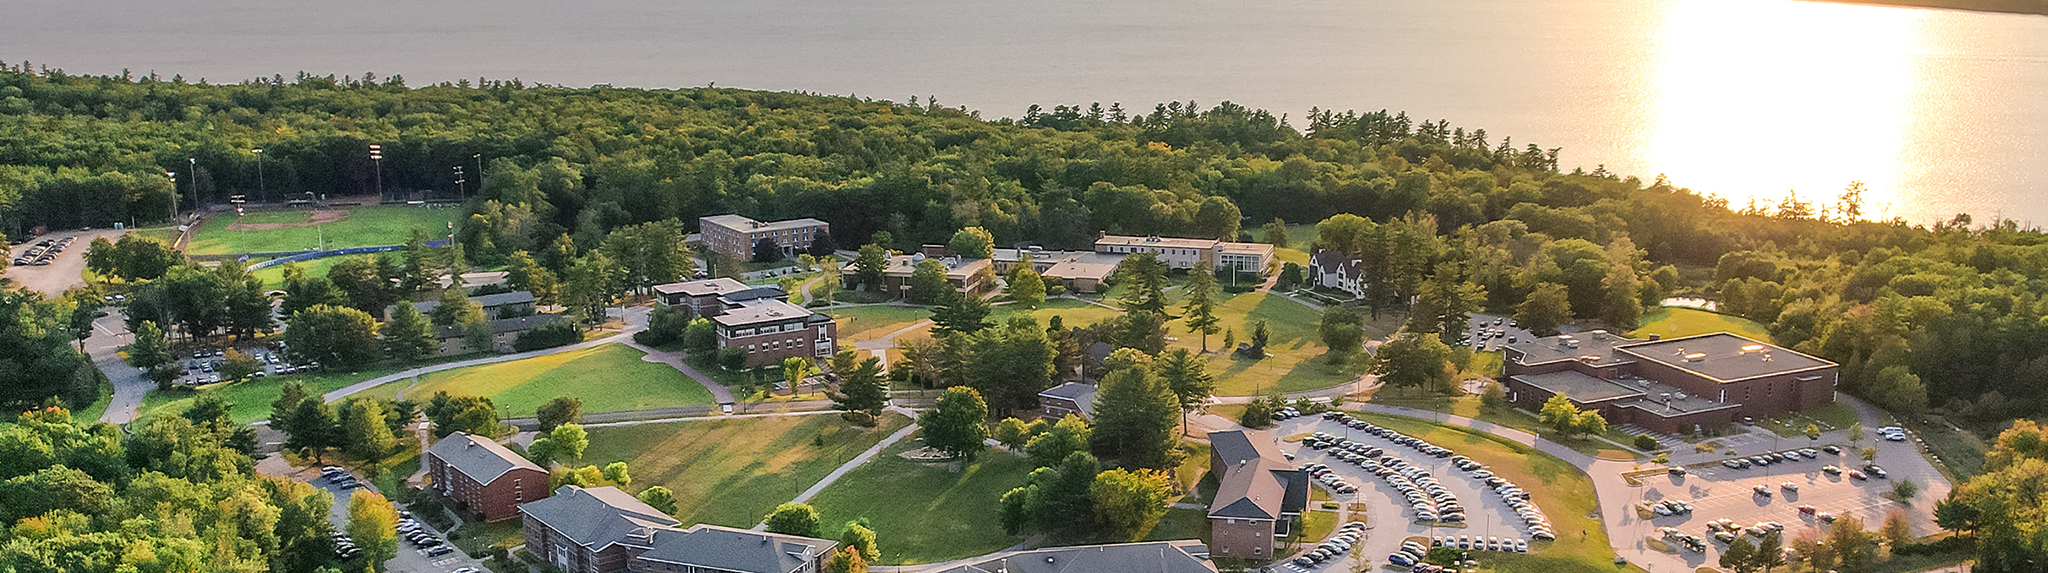 summer drone shot of campus